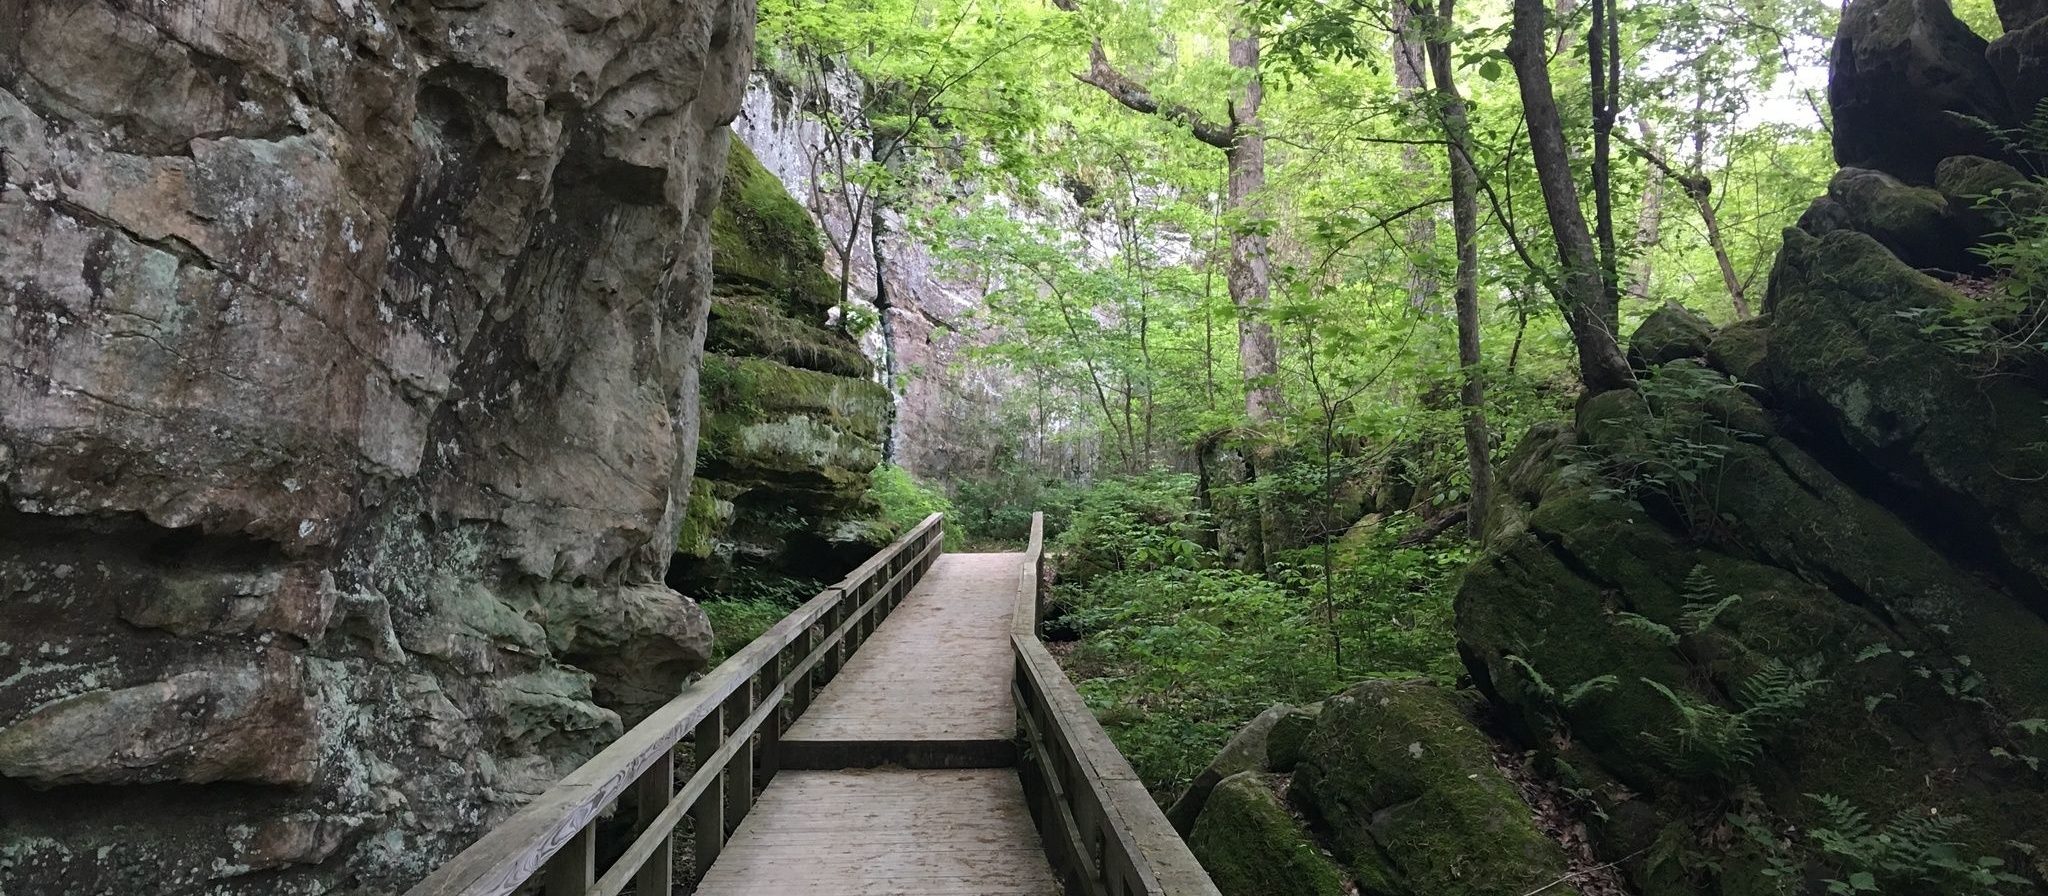 Explore this beautiful scenic hike by visiting Giant City State Park for a lovely afternoon hike this summer.